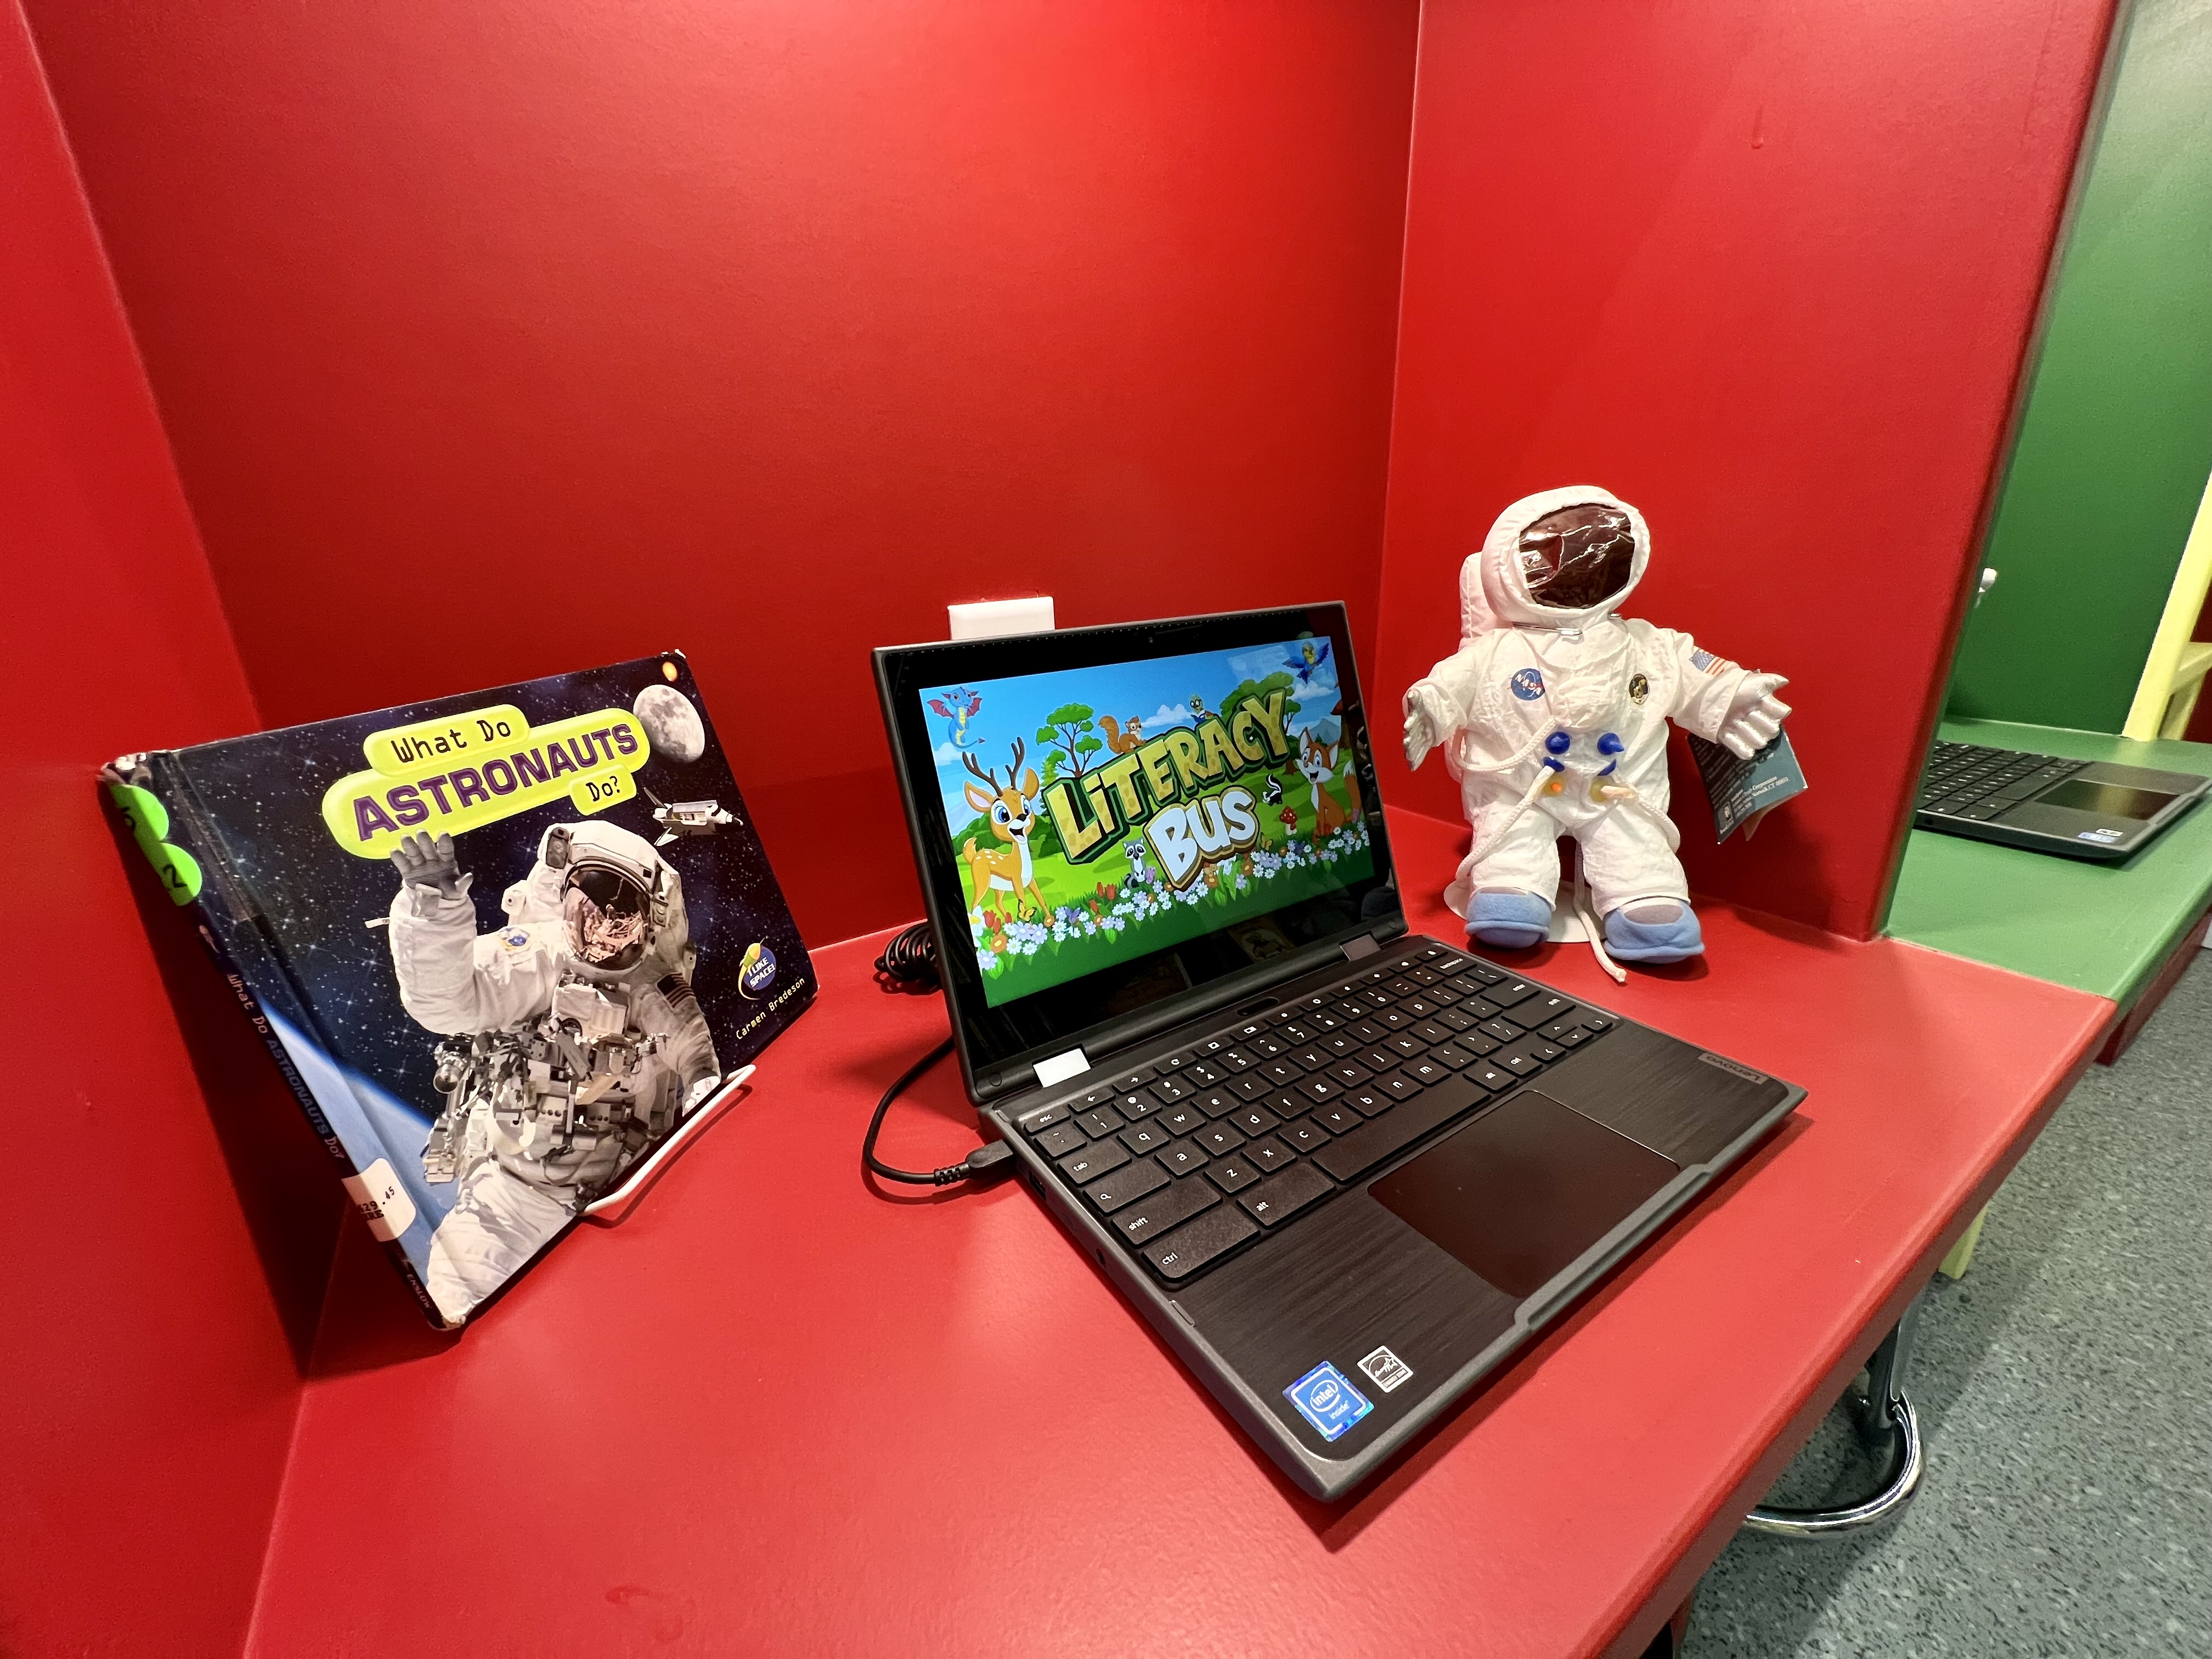 laptop, book and stuffed astronaut on a red shelf